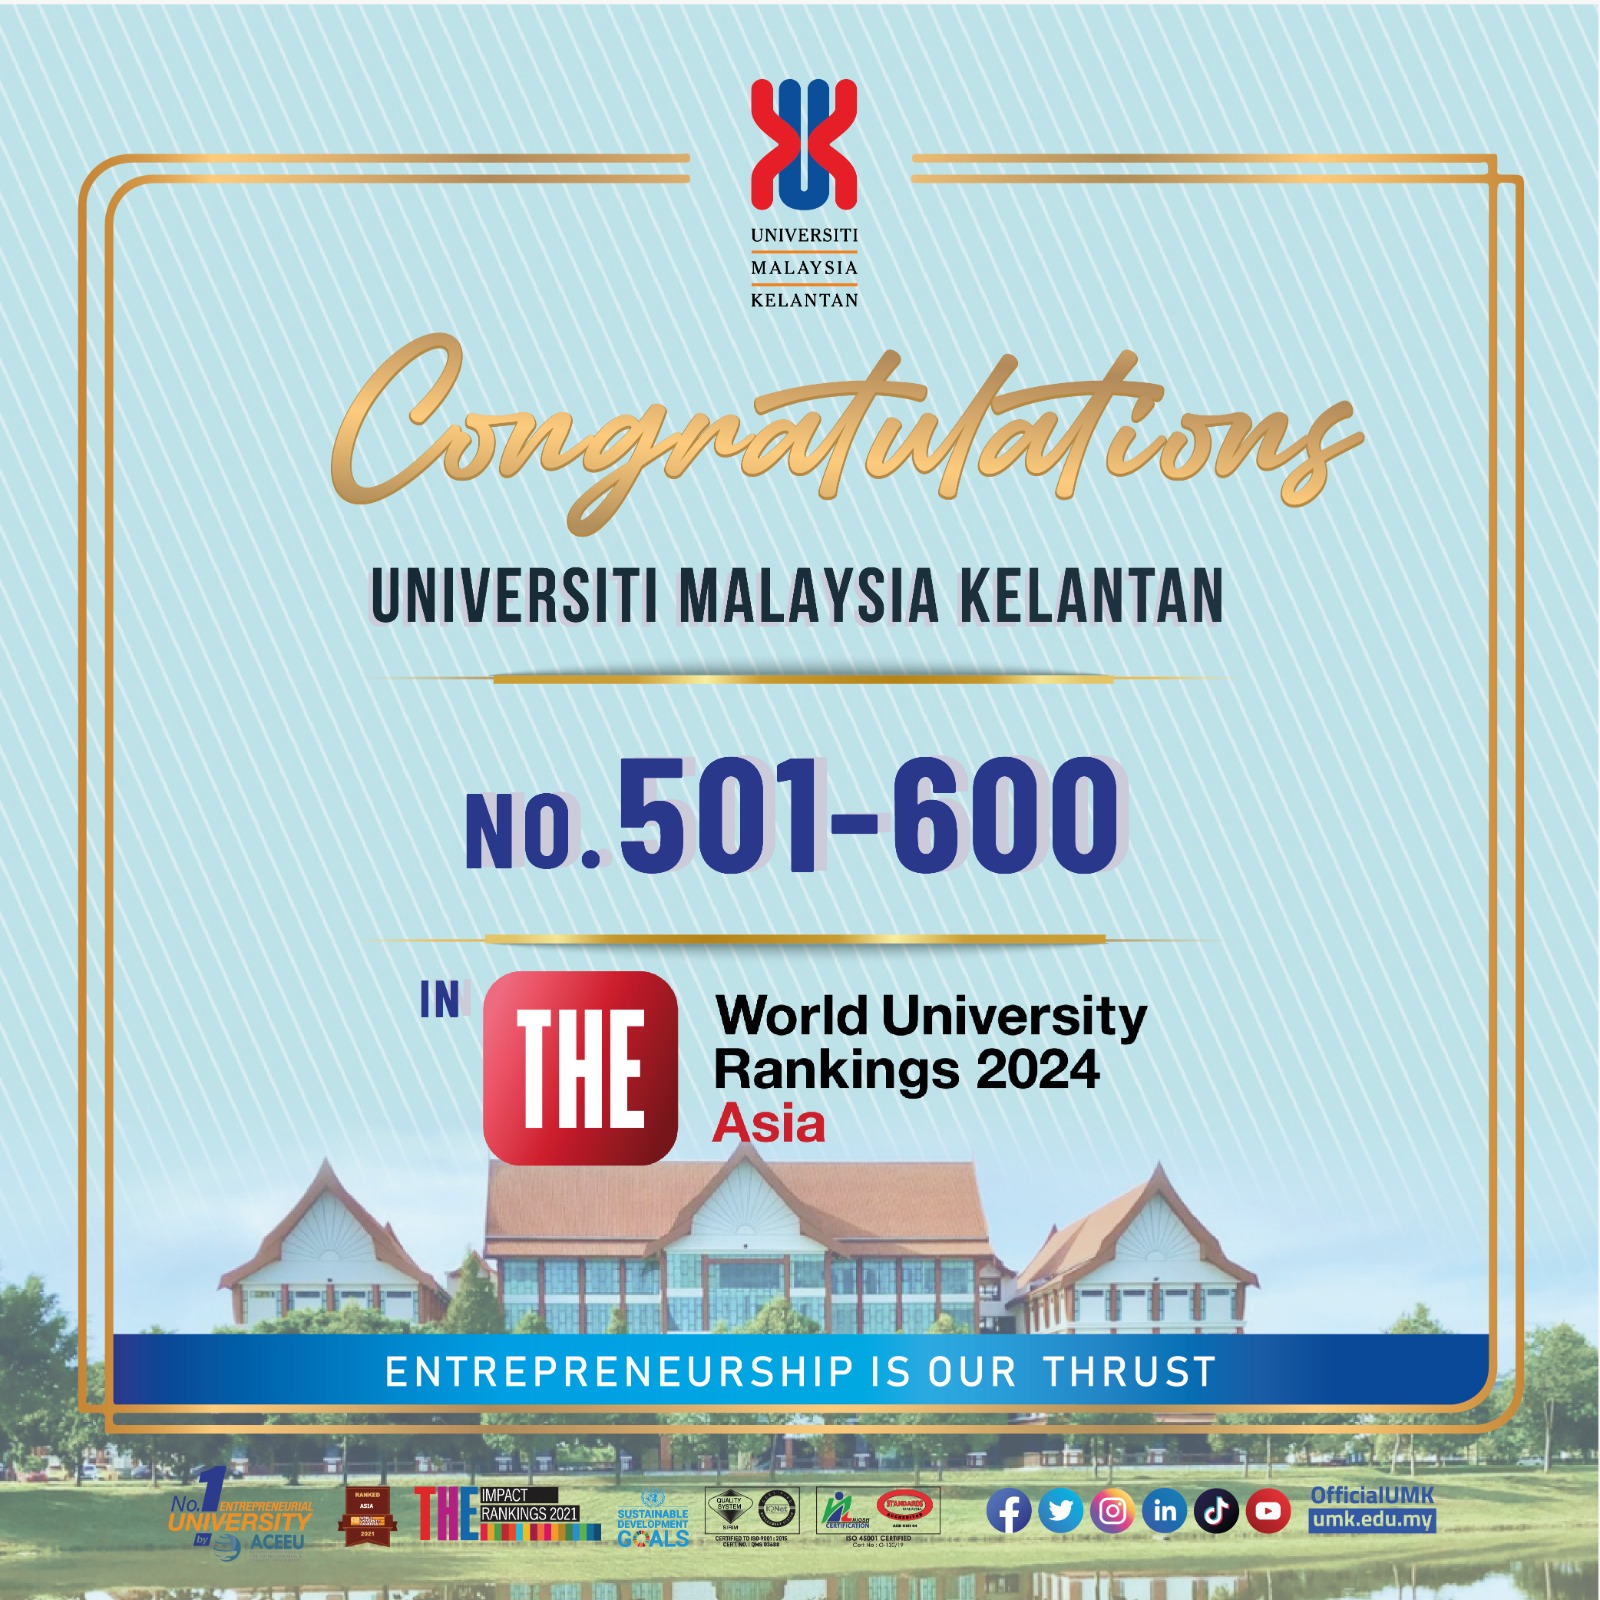 Top Universities In Malaysia Based On Times Higher Education (THE) World University Rankings 2024 Asia